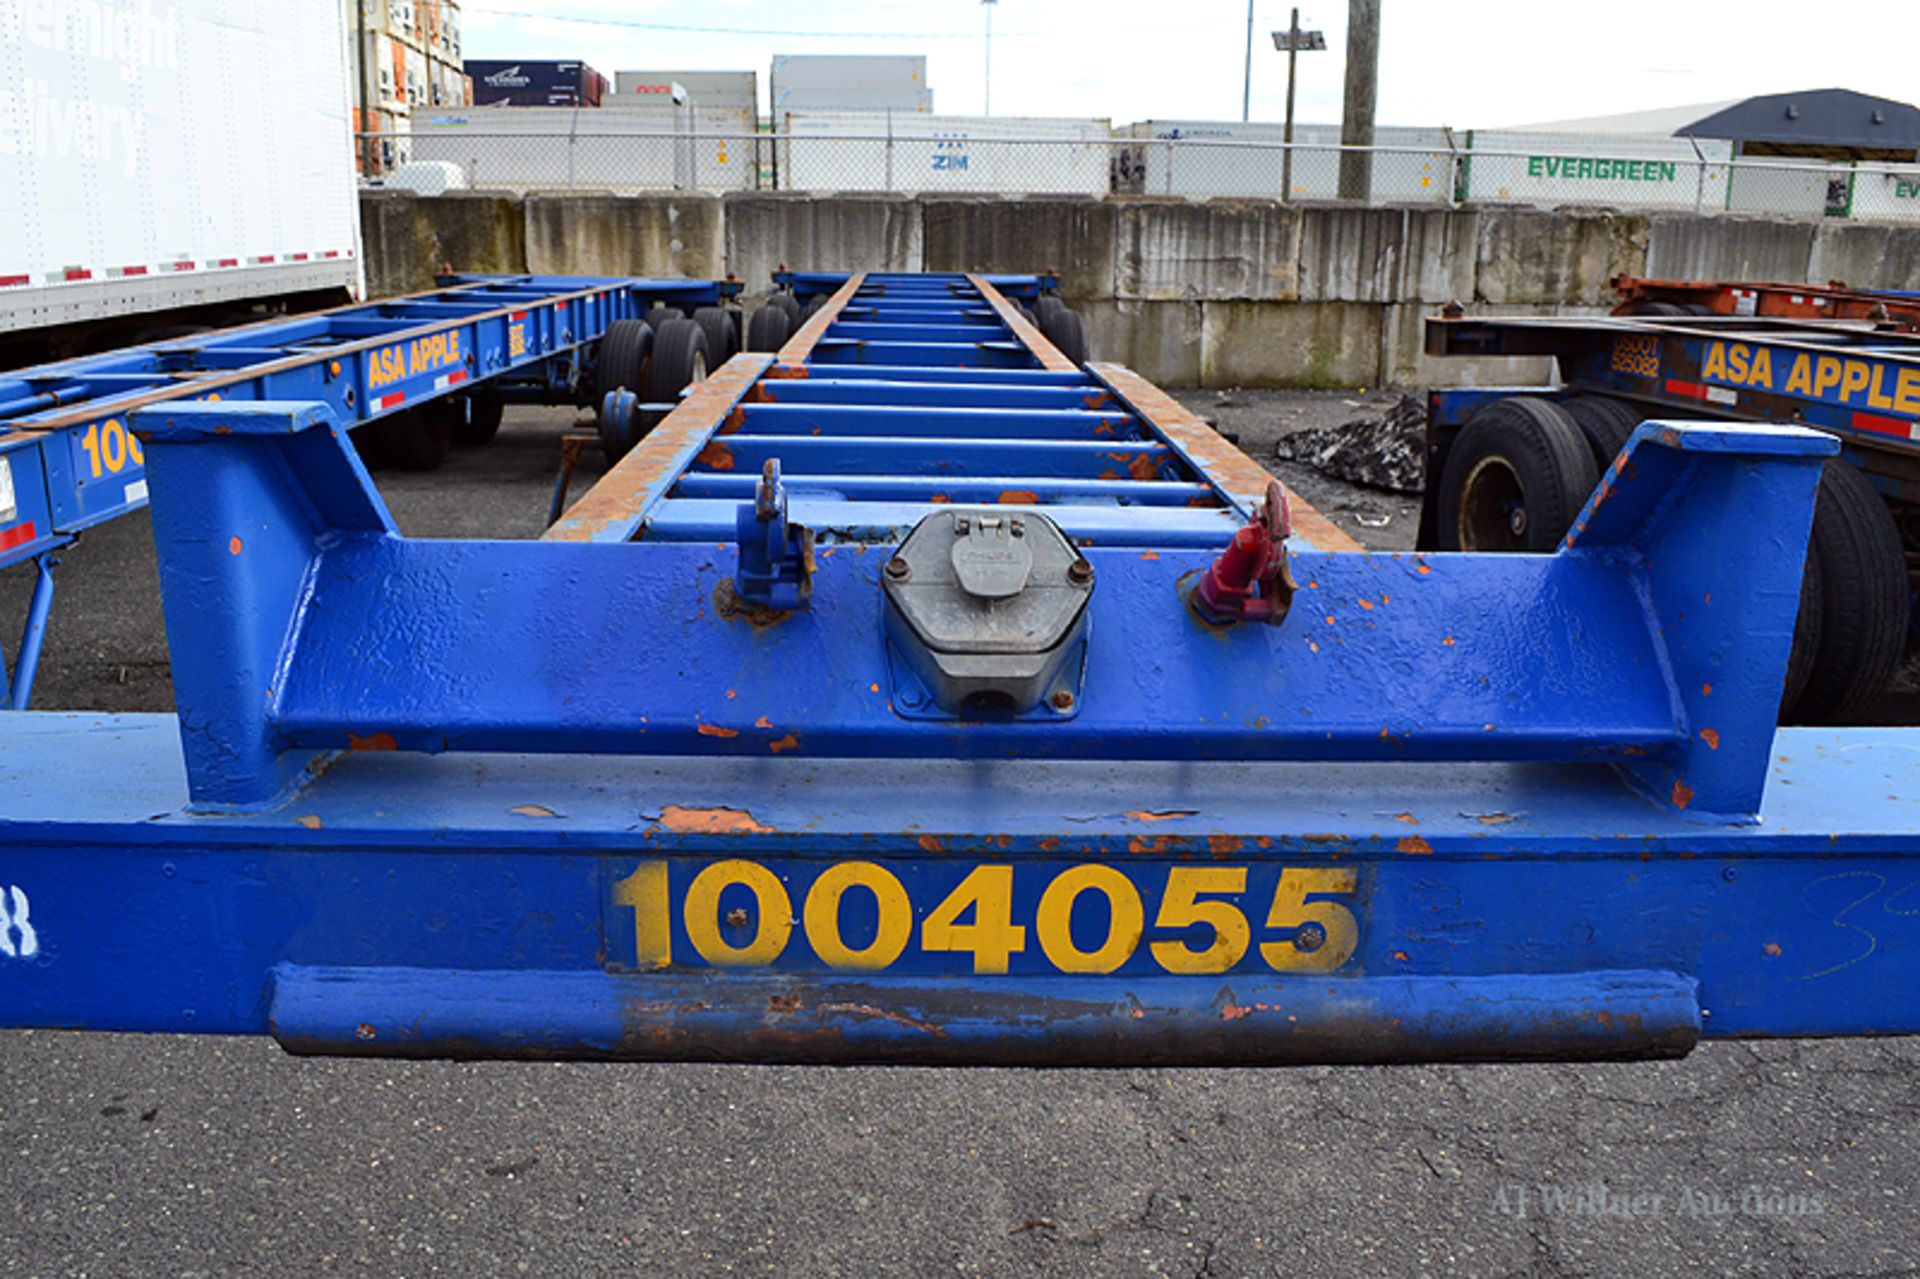 1987 Hyundai 40'-0 gooseneck container chassis VIN 145C412S7HL009759 (Unit #1004055) - Image 2 of 2